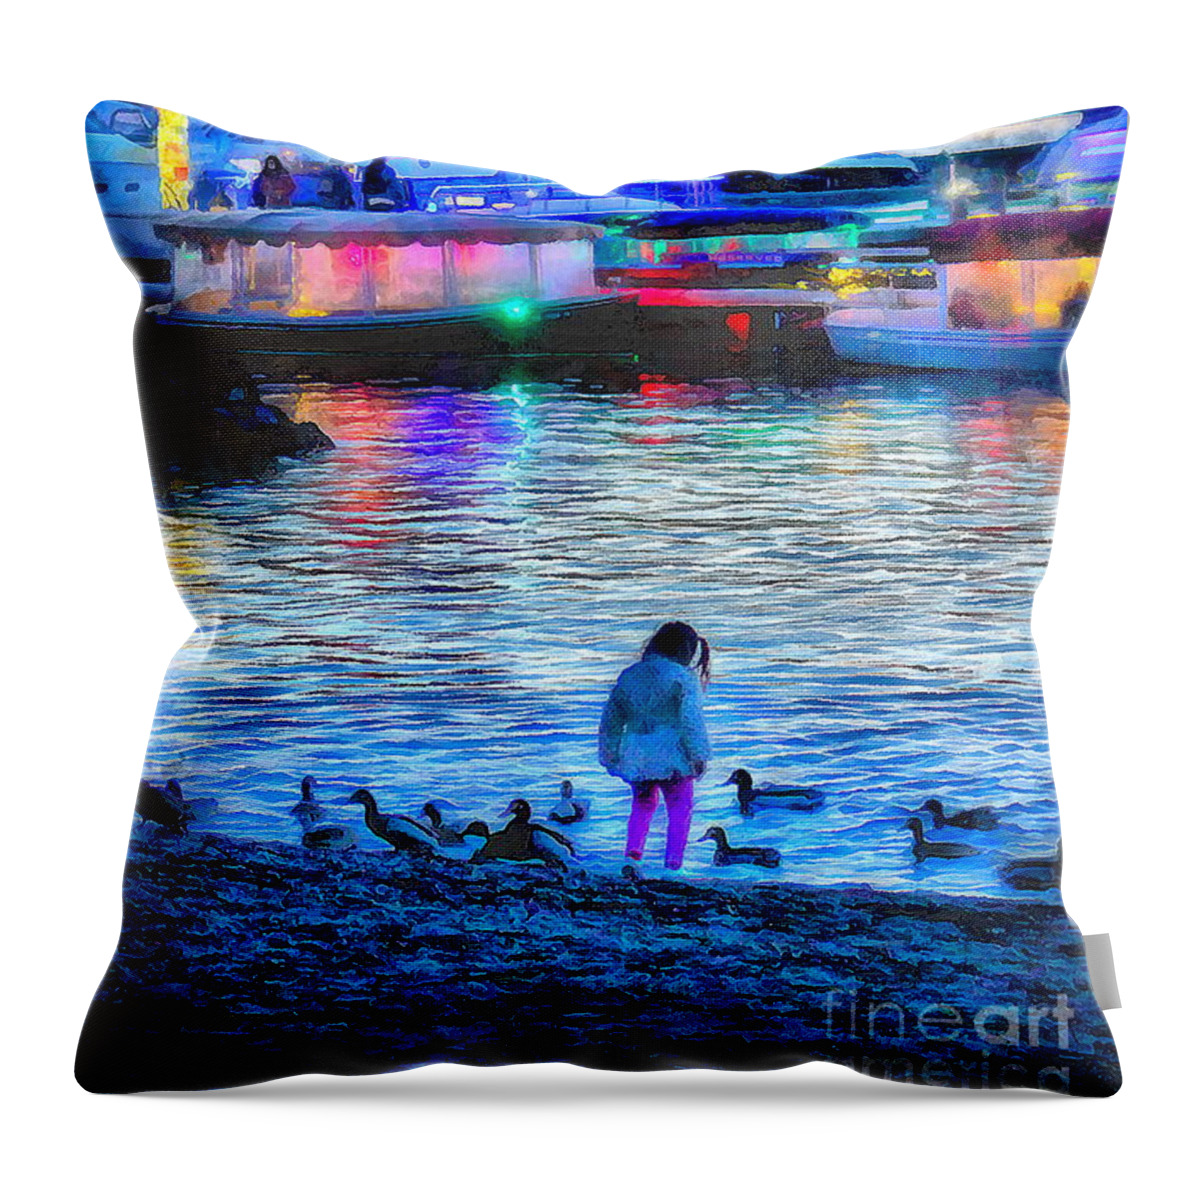 Girl Throw Pillow featuring the photograph Girl by the Lake with Holiday Lights by Sea Change Vibes